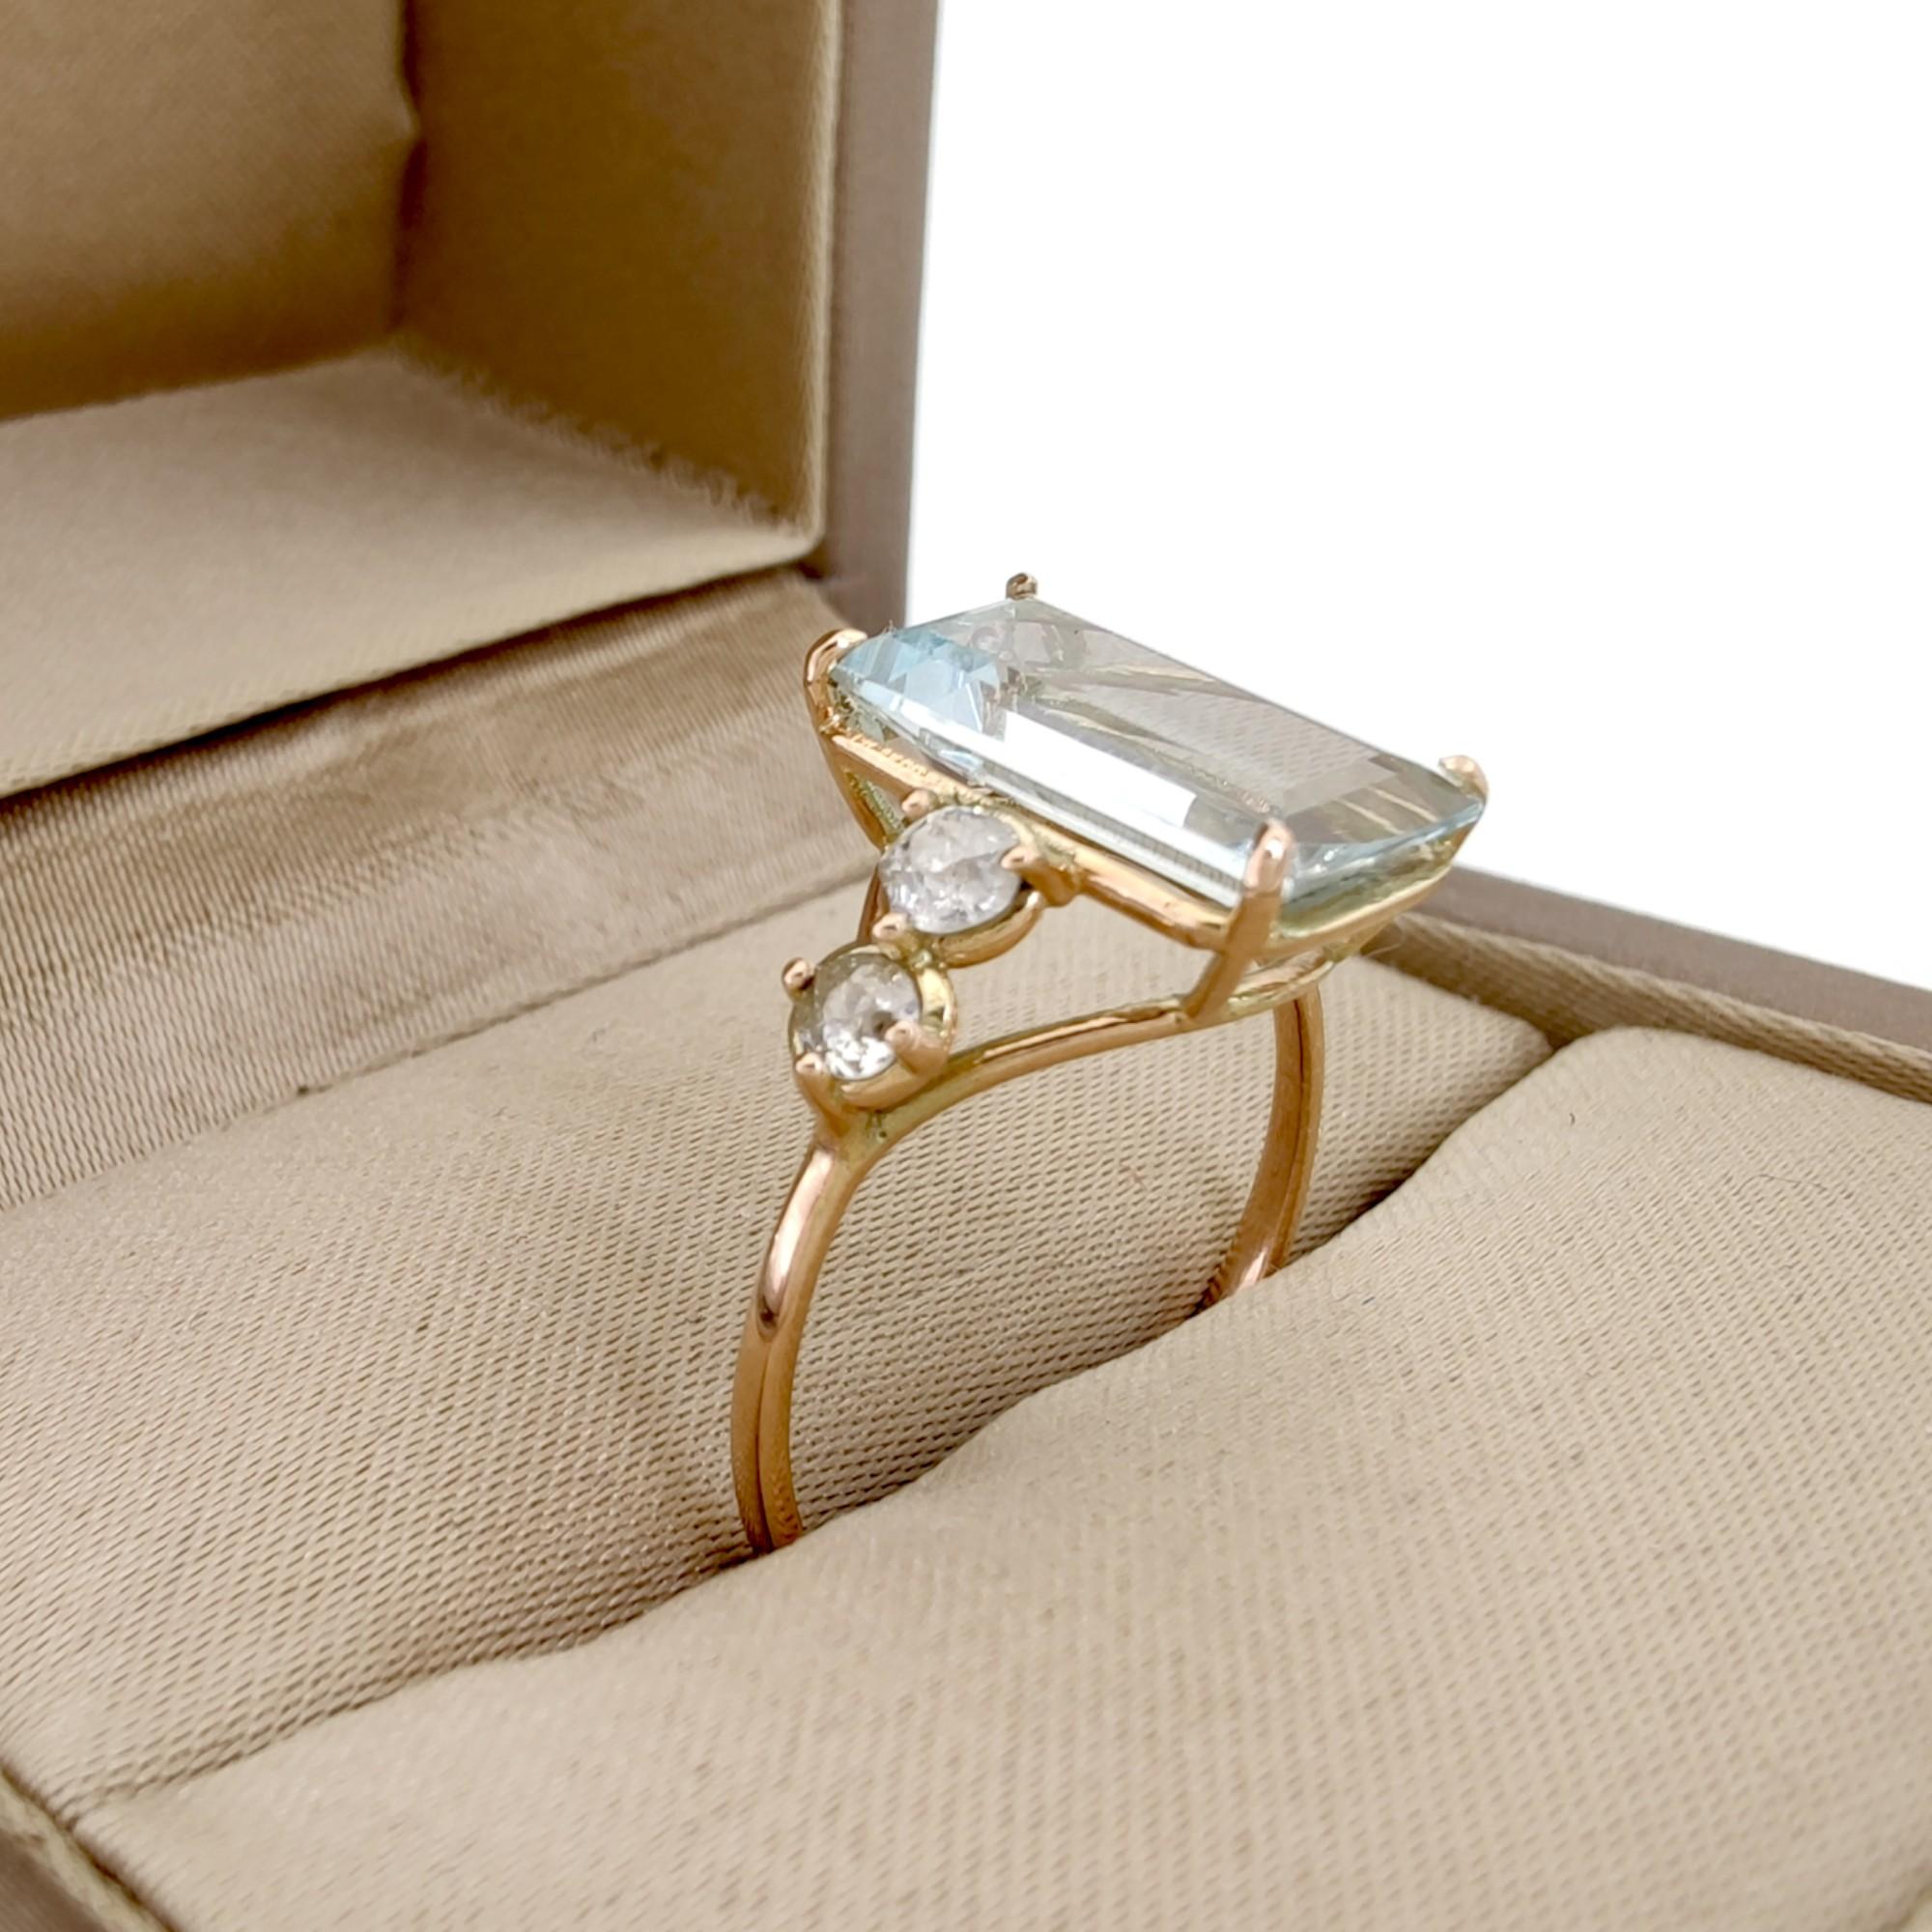 Women's Certified 2.30 carats Aquamarine Engagement Ring - 14k Gold with Diamonds For Sale